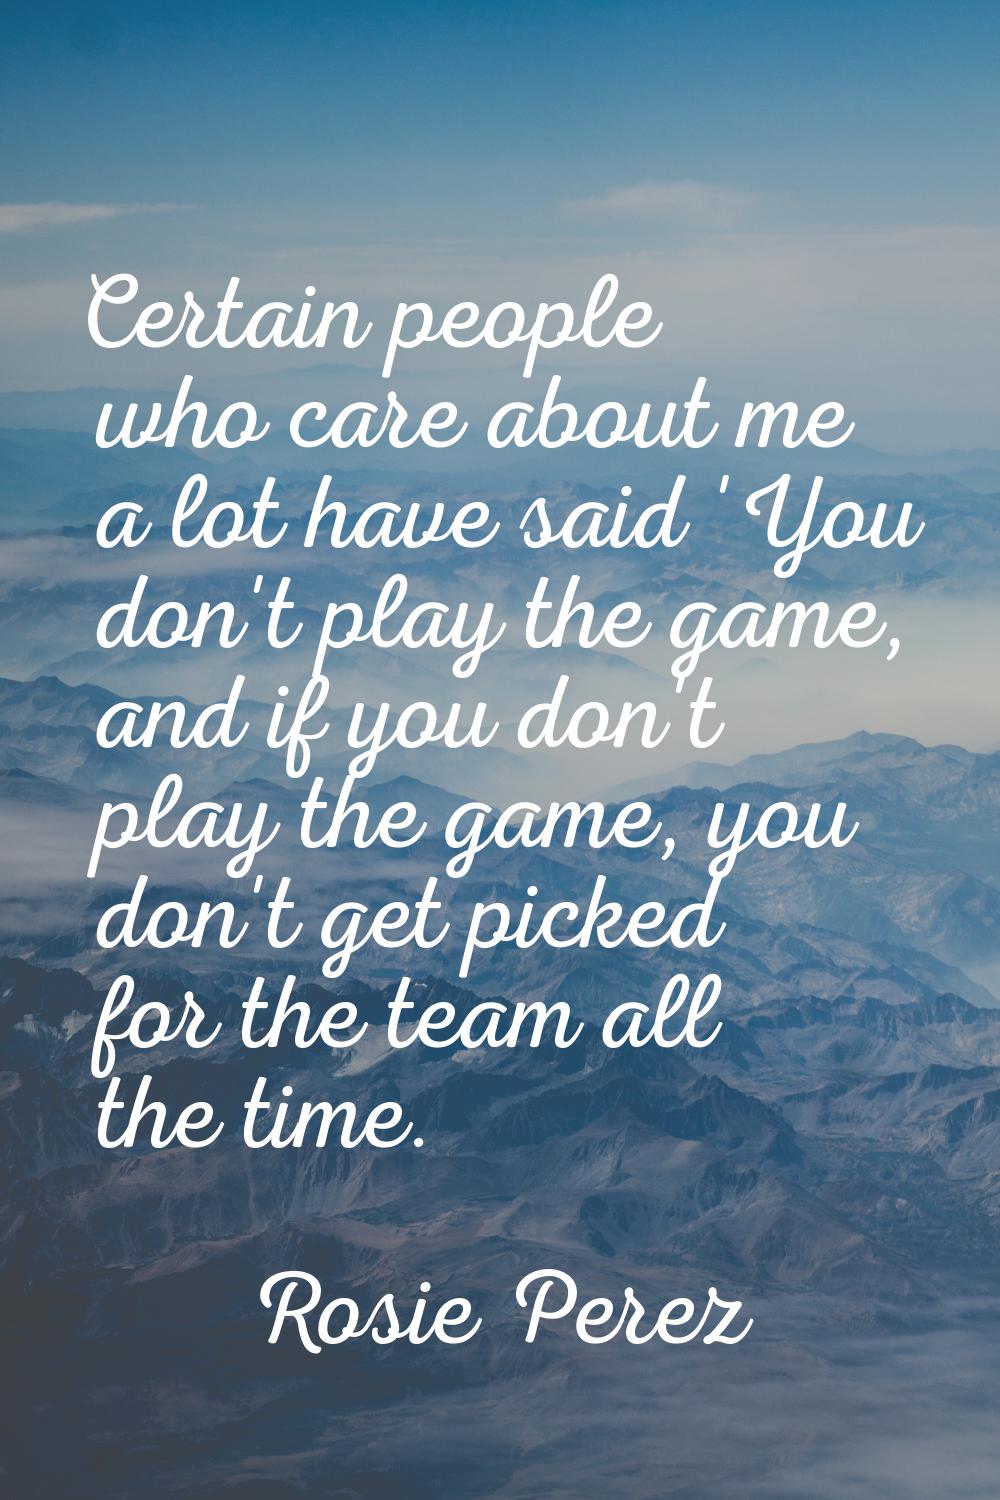 Certain people who care about me a lot have said 'You don't play the game, and if you don't play th